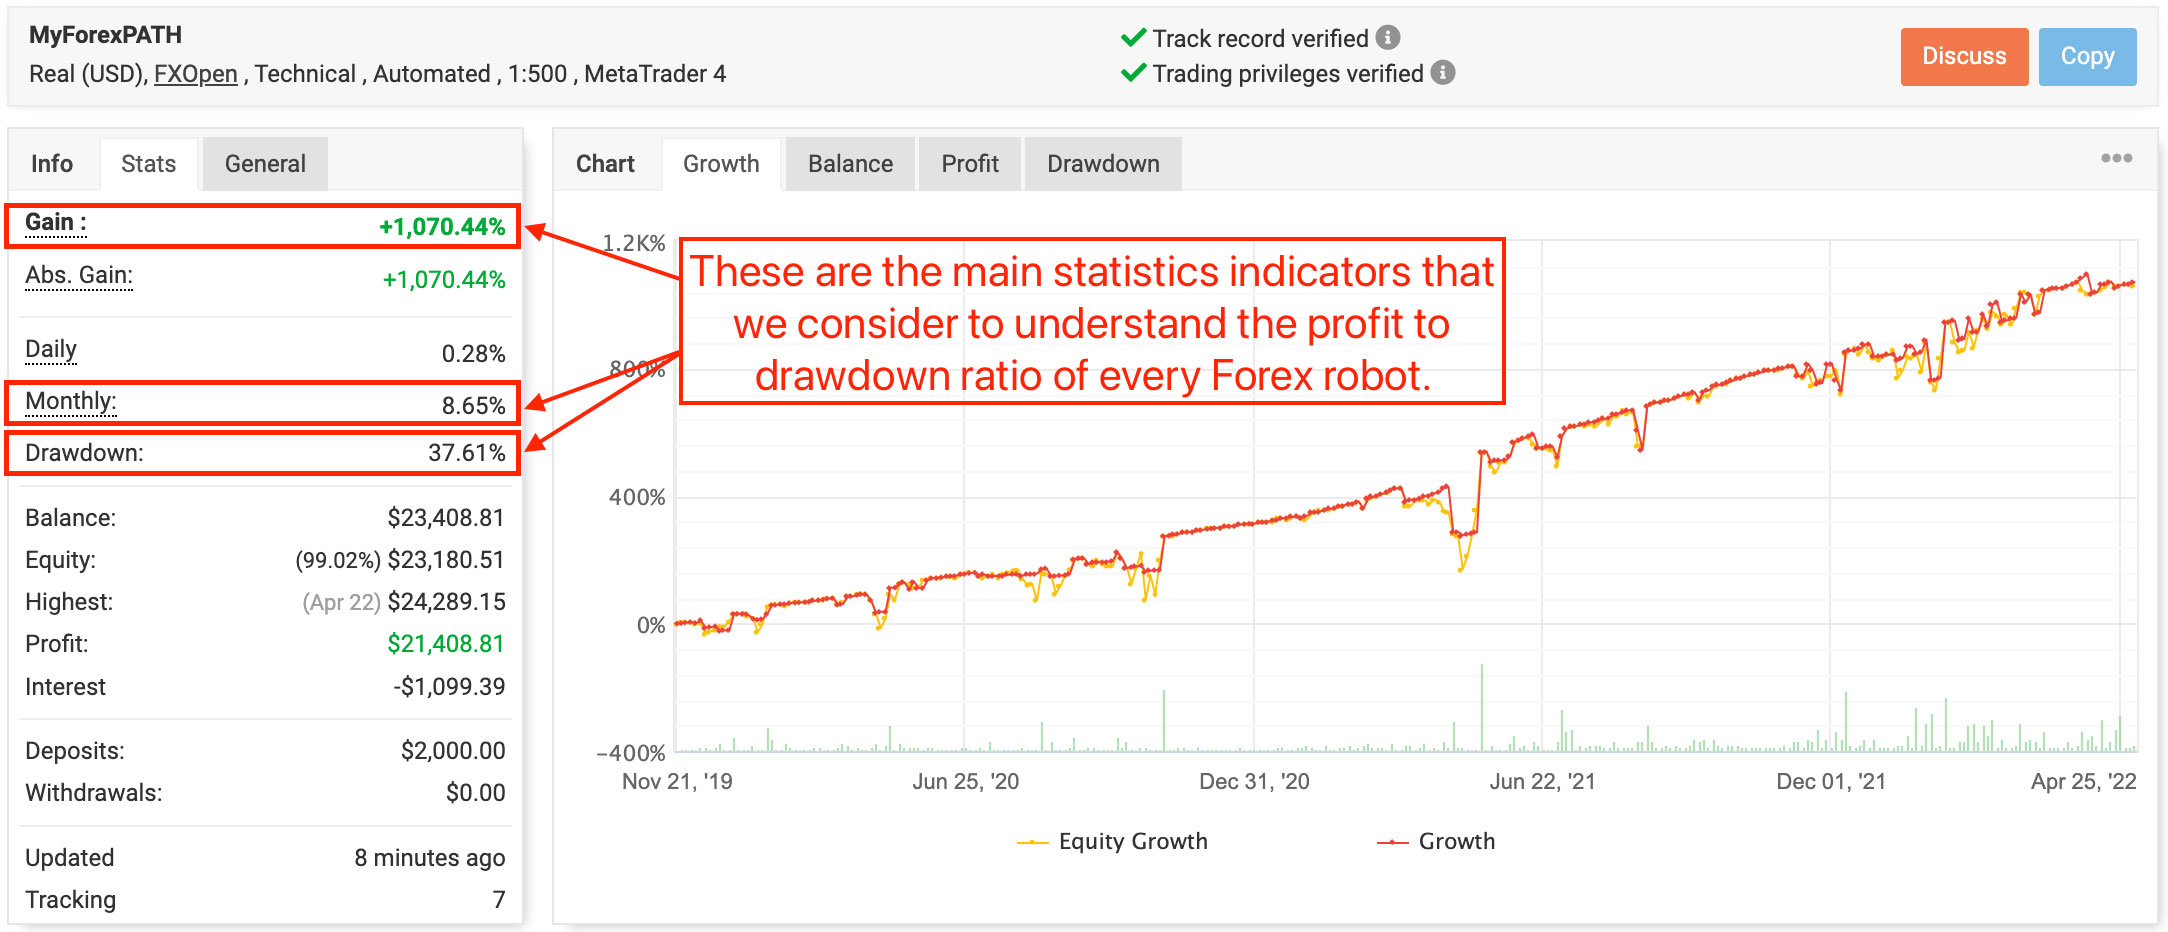 MyForexPath EA live trading results from Myfxbook